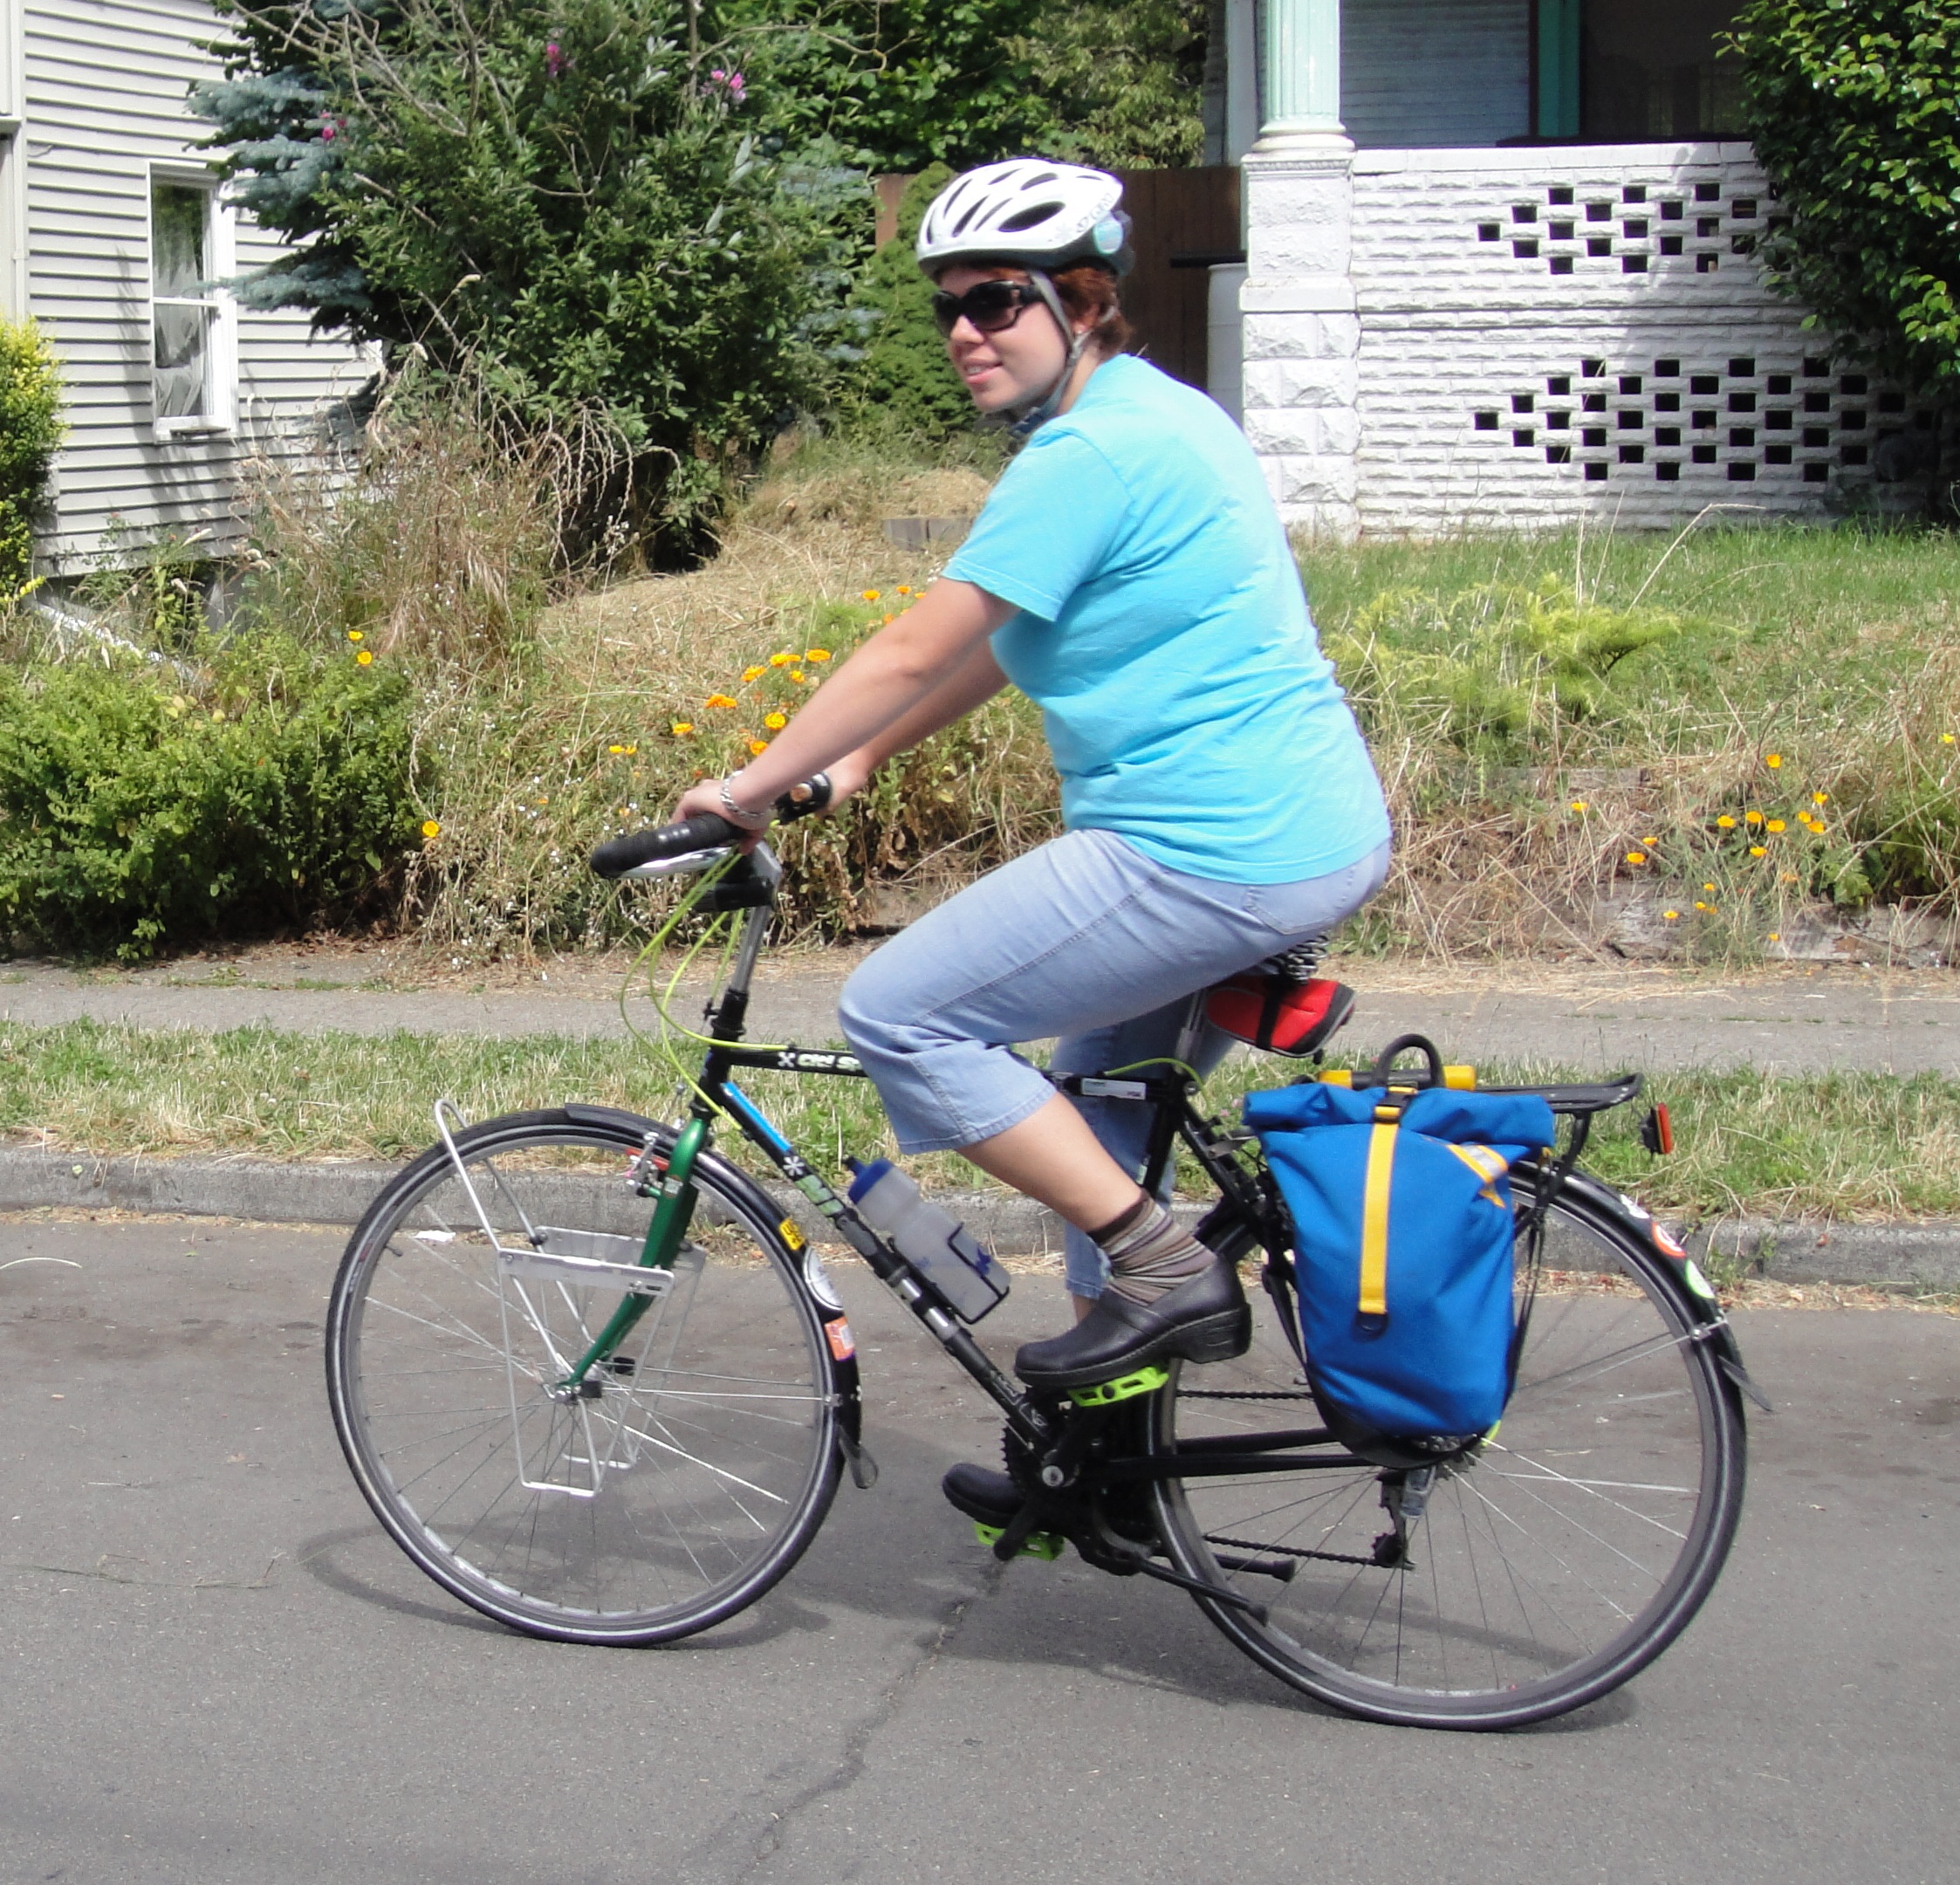 Product Review: North St. Panniers – Community Cycling Center